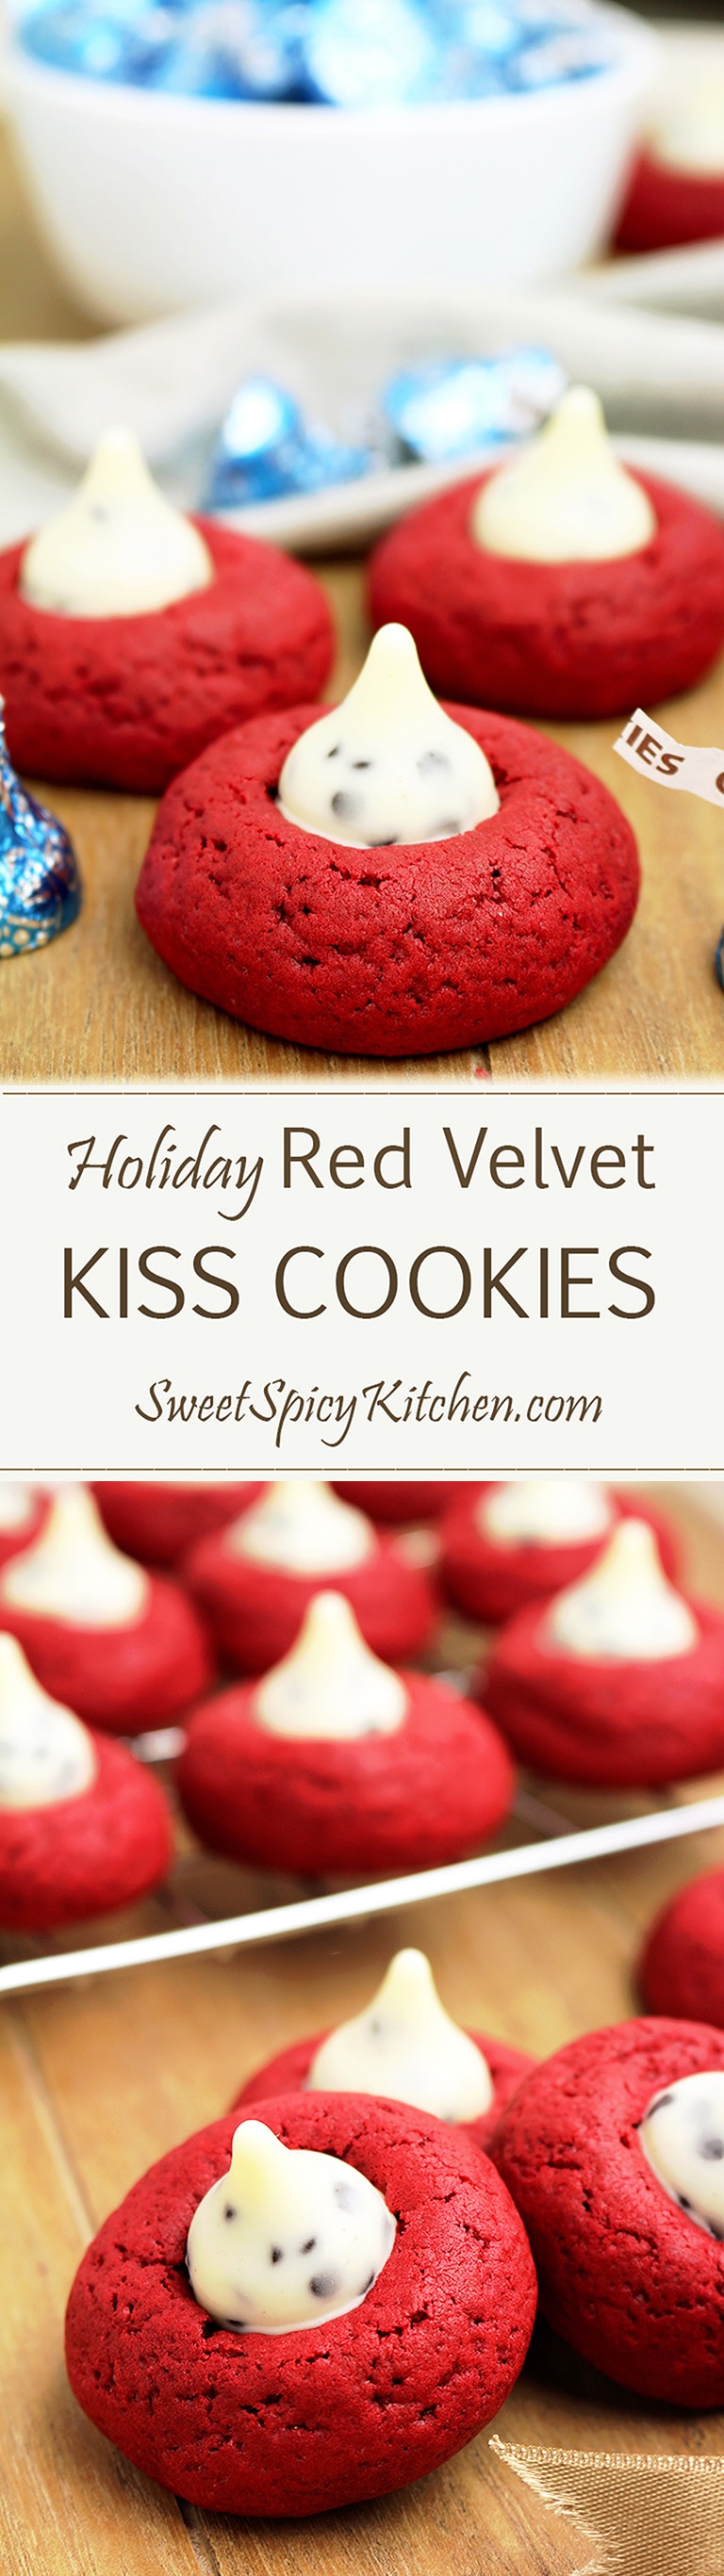 This is a recipe for cookies ideal for the holidays to come, like Christmas, New Year‘s Eve or Valentine’s Day.